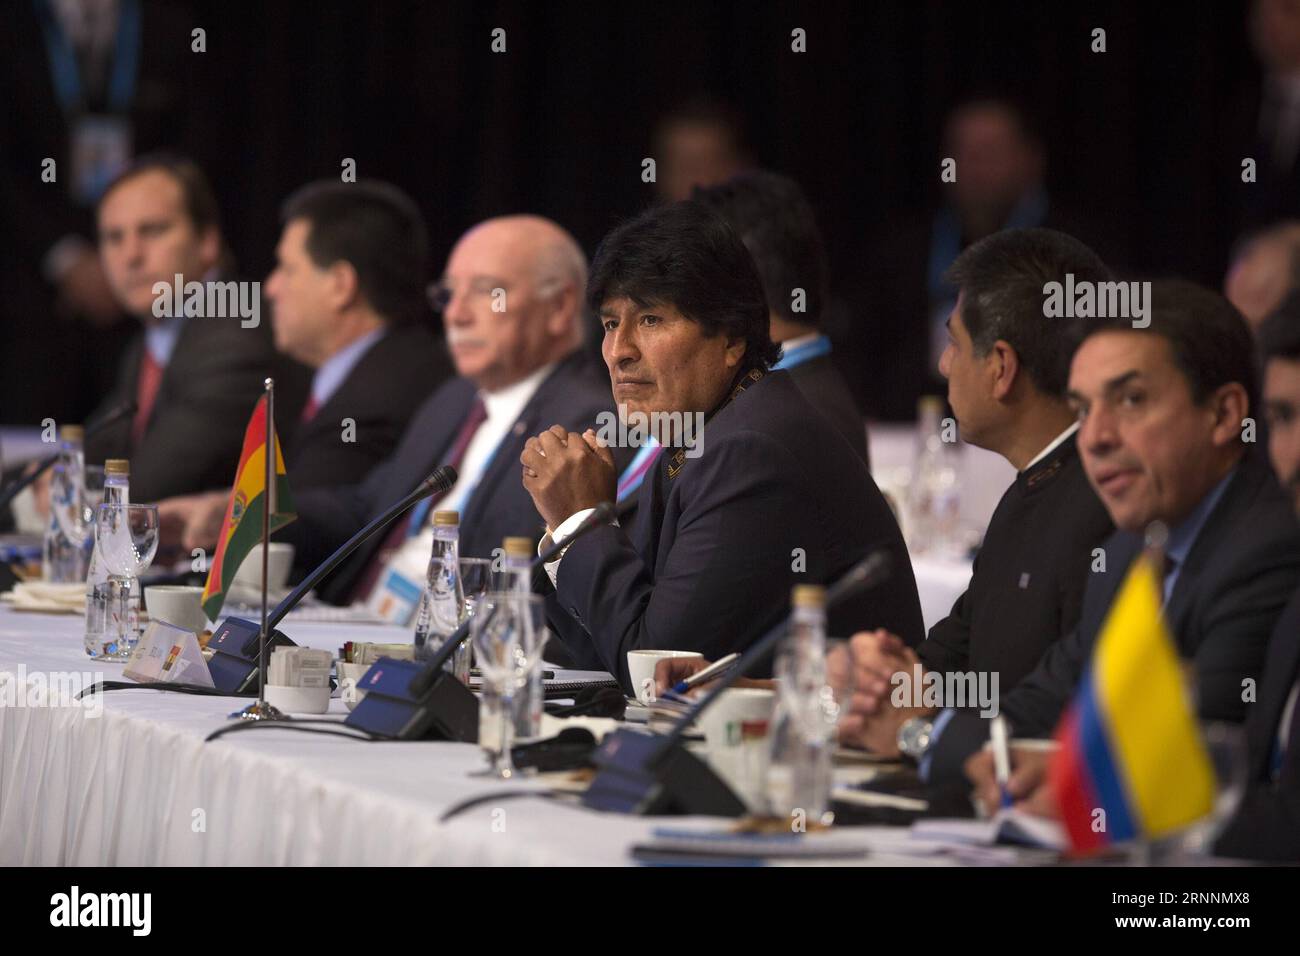 (170722) -- MENDOZA, July 22, 2017 -- President of Bolivia Evo Morales (3rd R) attends the Presidents meeting during the Summit of Heads of States of the Southern Common Market (Mercosur) and Associated States, in the city of Mendoza, Argentina, on July 21, 2017. Members of the Southern Common Market (Mercosur) trade bloc seek to recover the group s trade dynamism by boosting free trade among themselves and with other regions, a senior Argentine official said Friday. Martin Zabala) (ma)(gj) ARGENTINA-MENDOZA-MERCOSUR-SUMMIT e MARTINxZABALA PUBLICATIONxNOTxINxCHN   Mendoza July 22 2017 Presiden Stock Photo